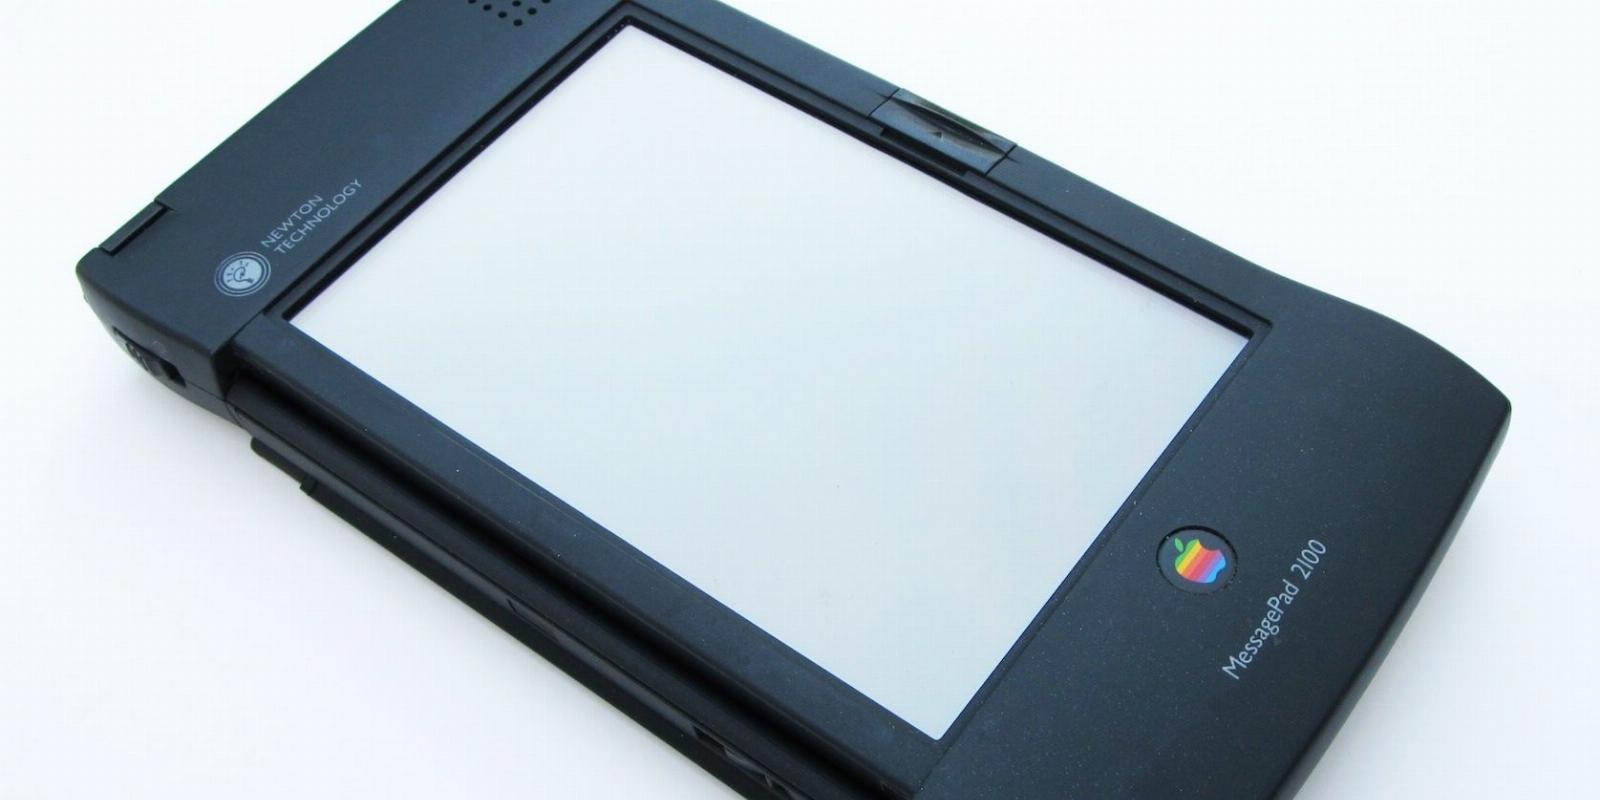 Apple Discontinued the Newton 25 Years Ago: Here’s What Happened to It Since